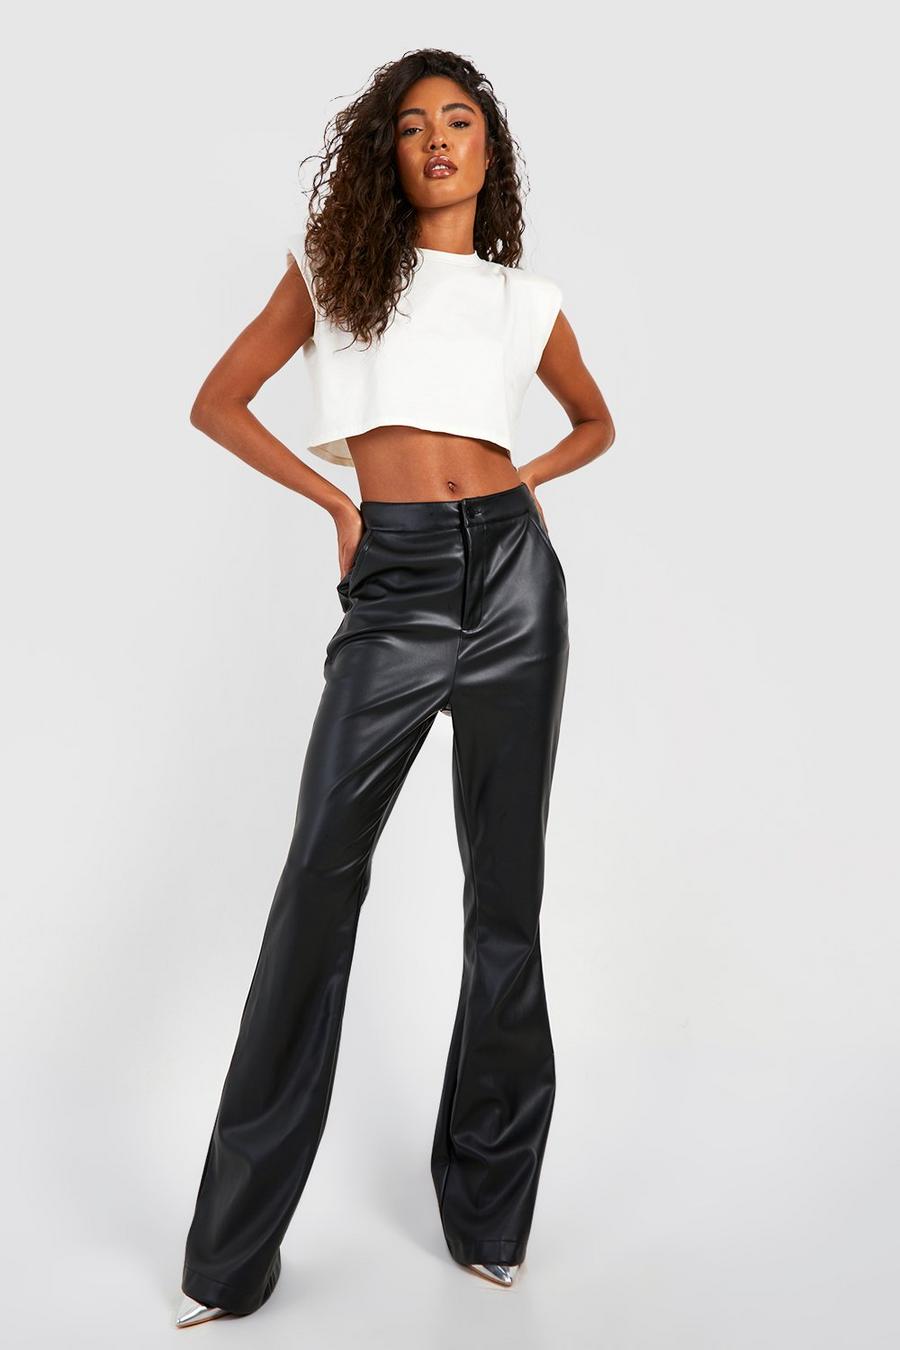 Black Tall Leather Look High Waisted Flared Pants